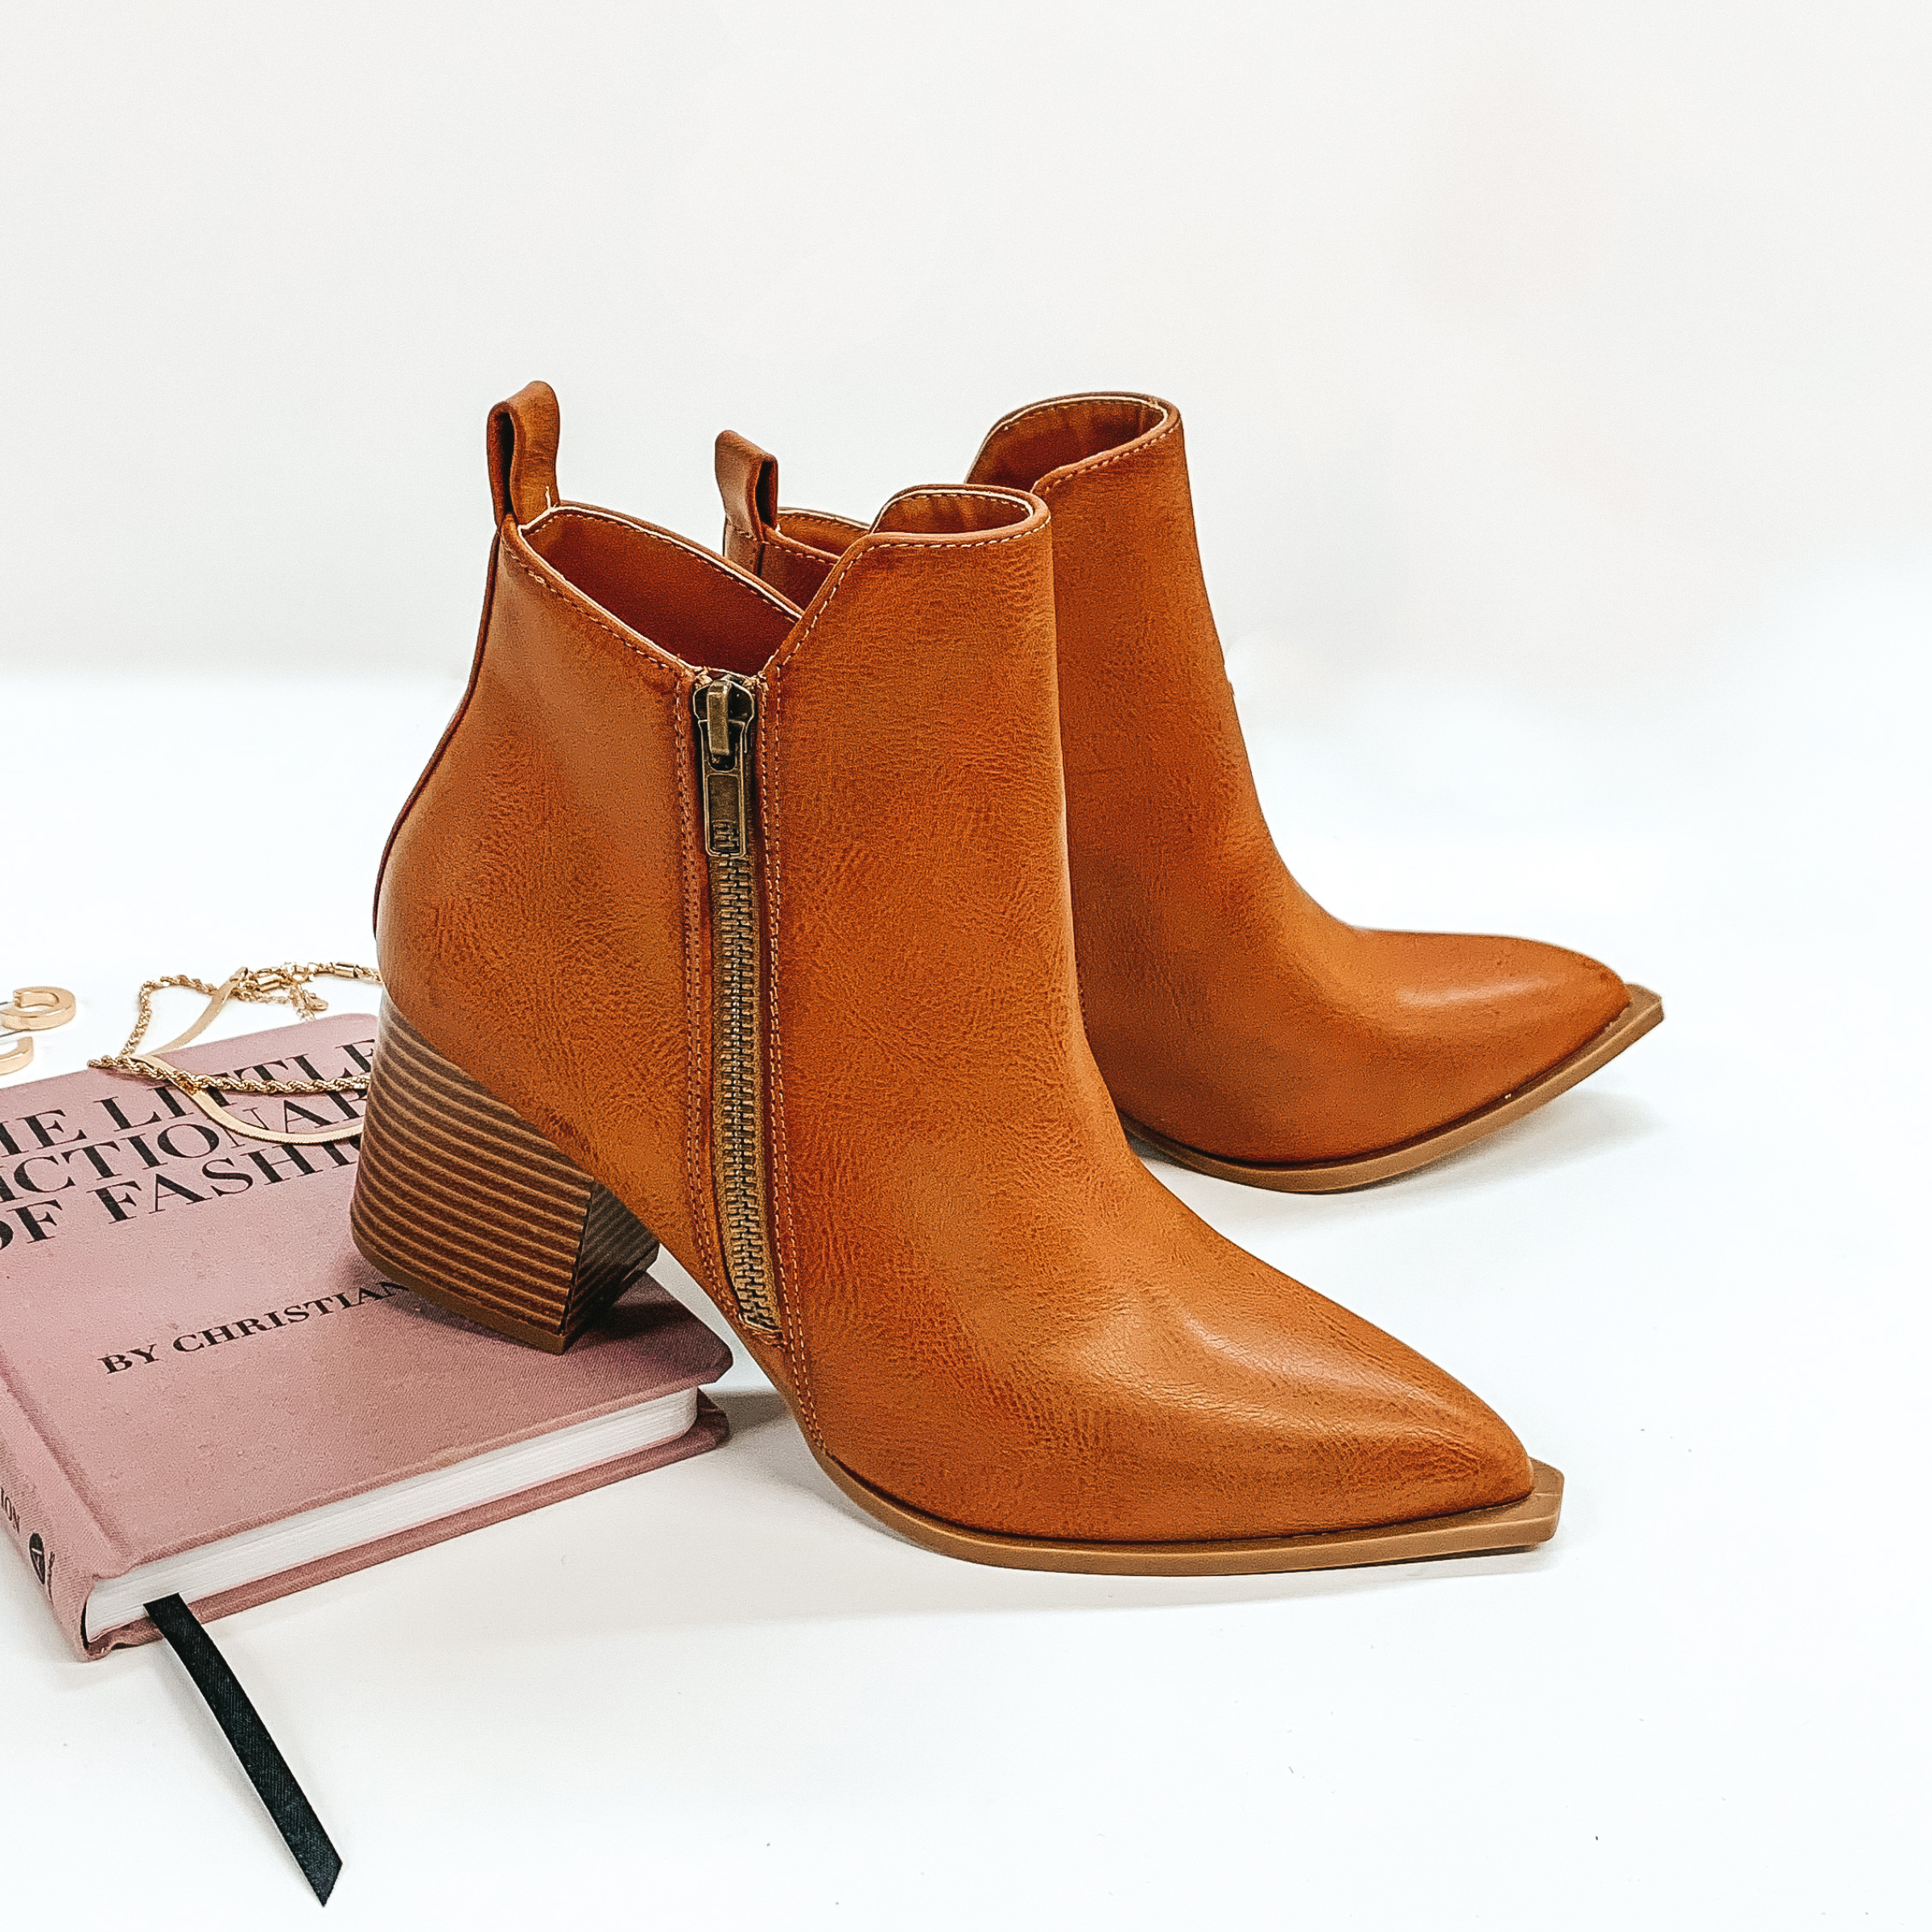 Latte Pick Me Up Heeled Booties with Pointed Toe and Side Zipper in Cognac - Giddy Up Glamour Boutique